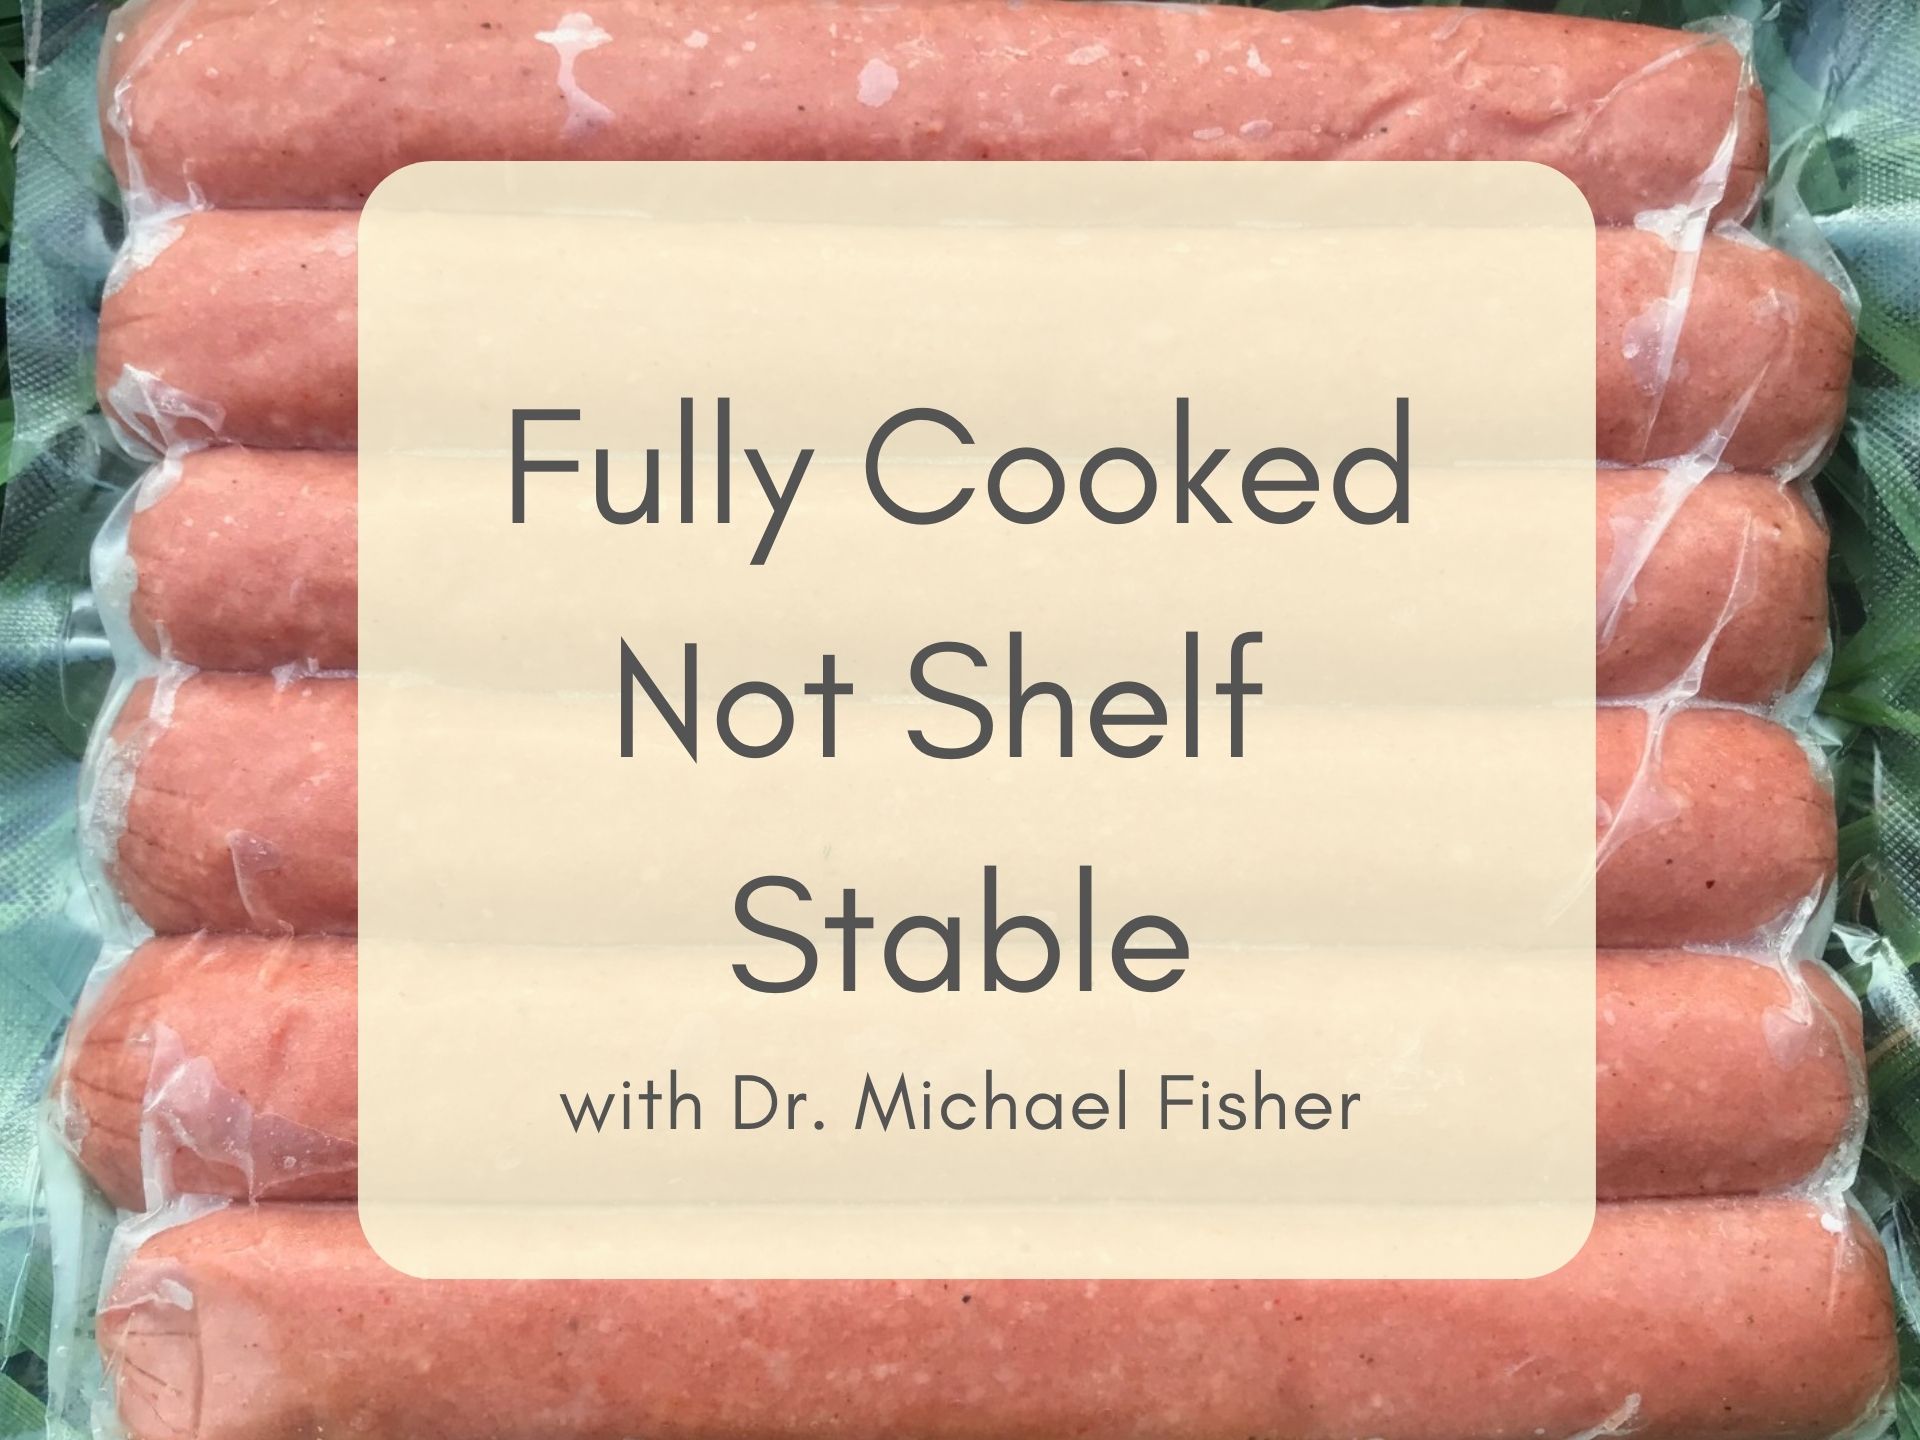 Fully Cooked, Not Shelf Stable